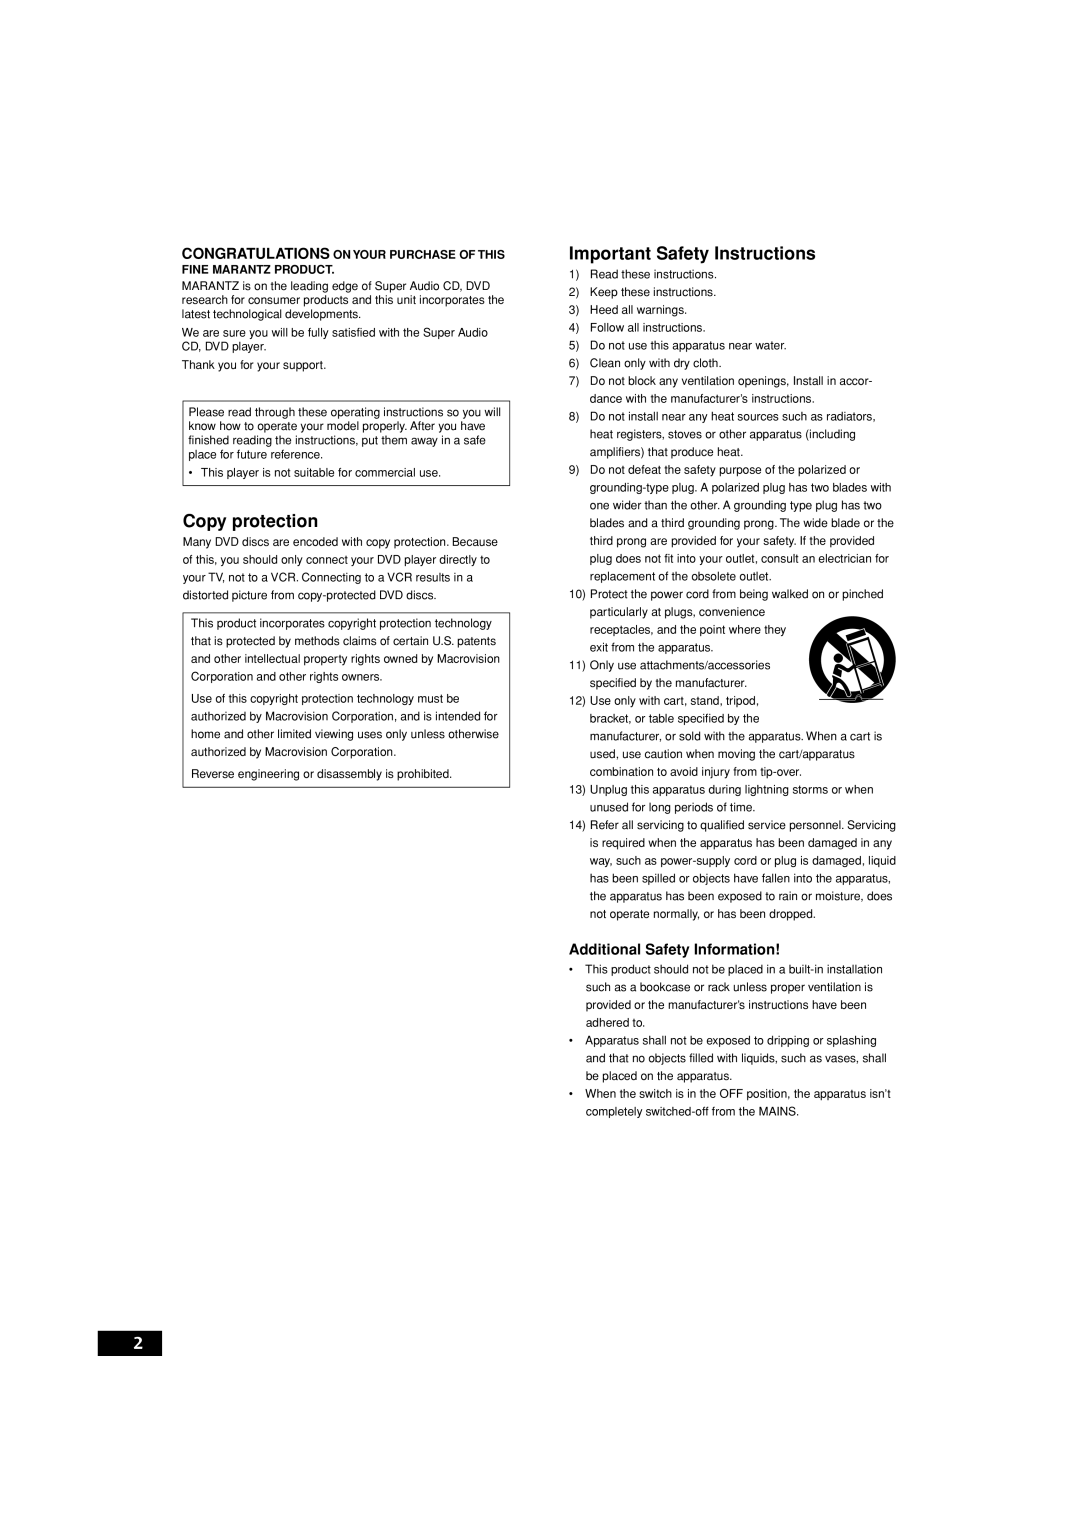 Marantz DV9600 manual Copy protection, Important Safety Instructions, Additional Safety Information 